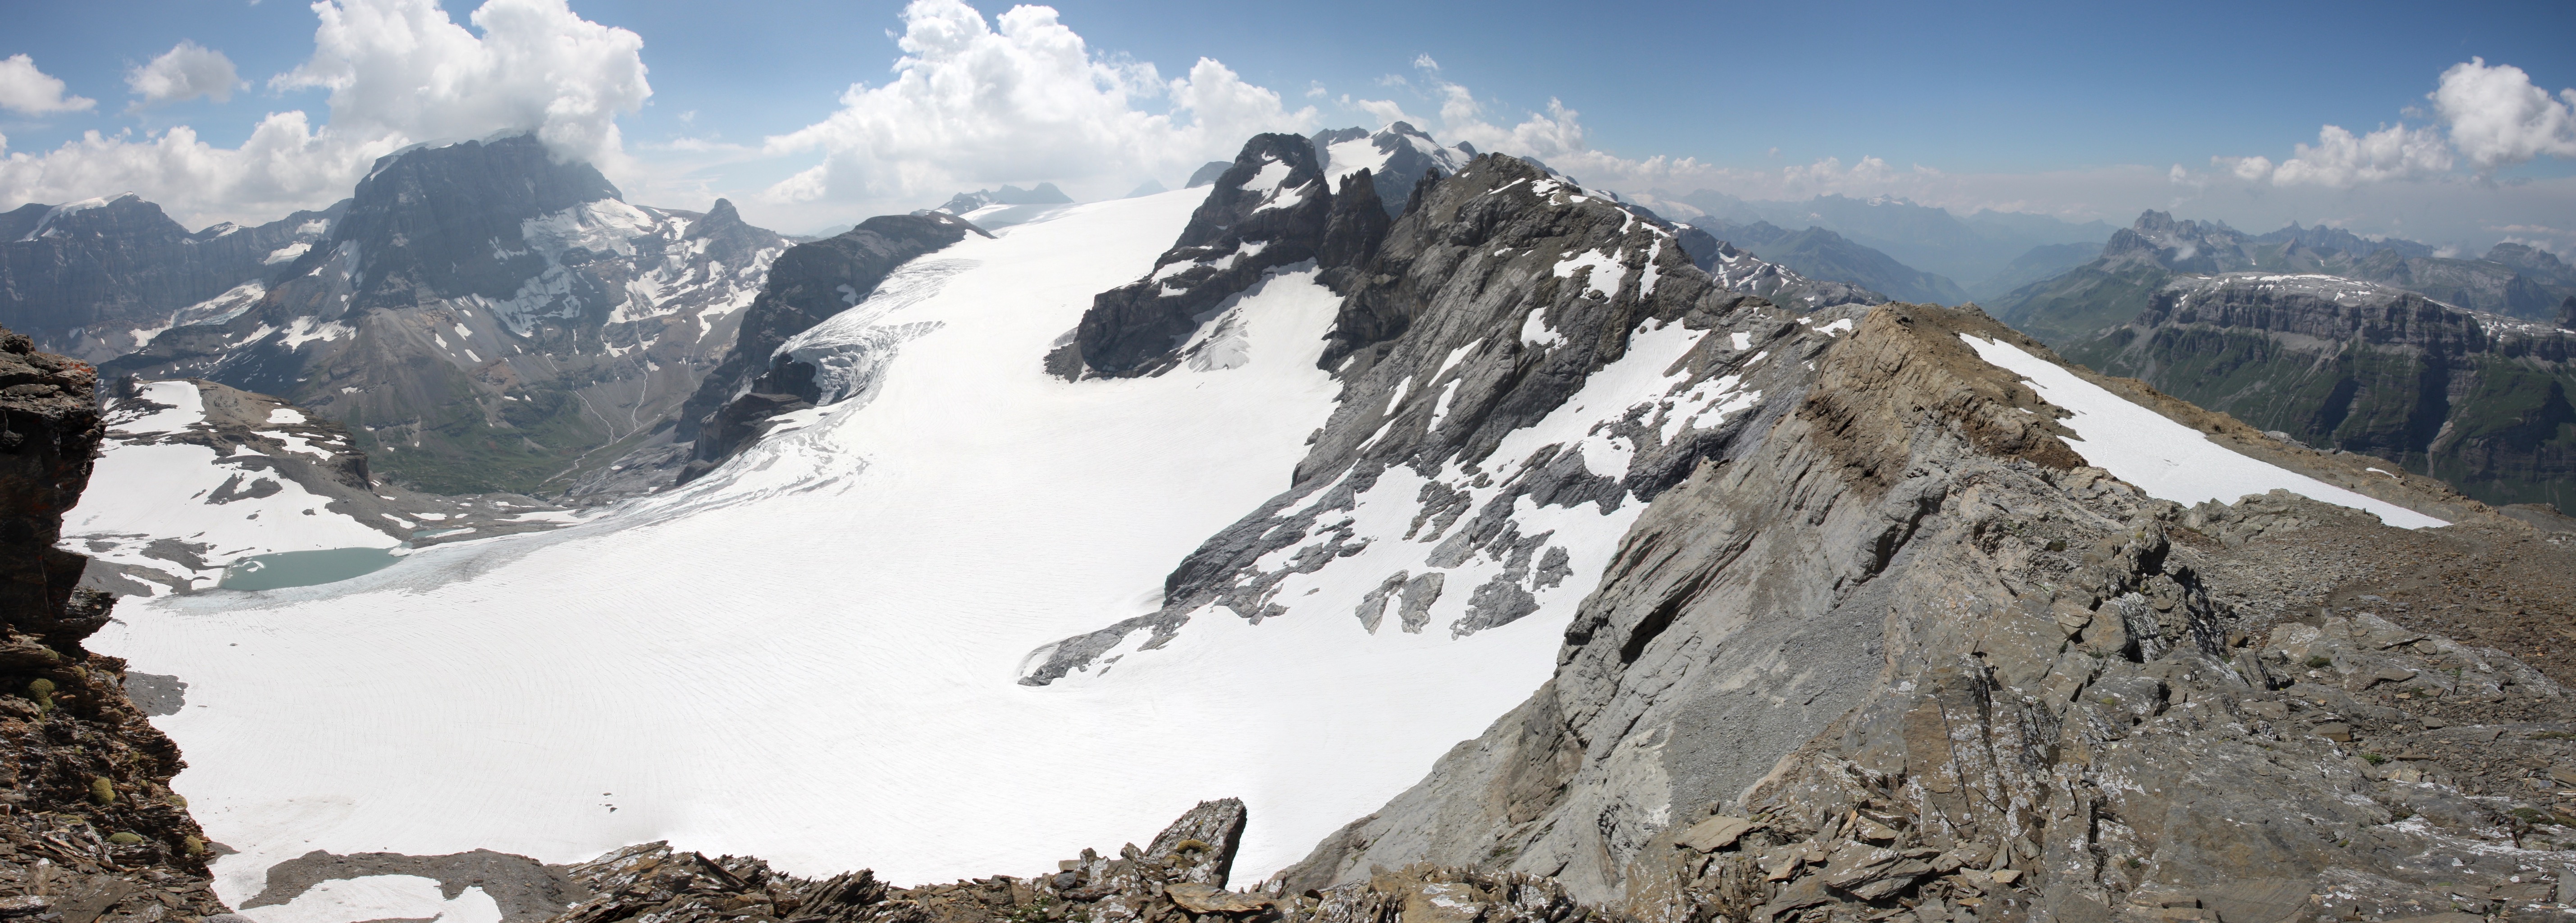 A panorama from the ridge below the peak of Gemsfairenstock. The distant mountain is Tödi (the highest mountain in the Glarus Alps). The large expanse of snow and ice in the centre is the Claridenfirn glacier (which has been subject to the longest continuous time series of mass balance measurements of any glacier in the world) and to the right in the distance is the Urnerboden valley where we started our hike in the morning.